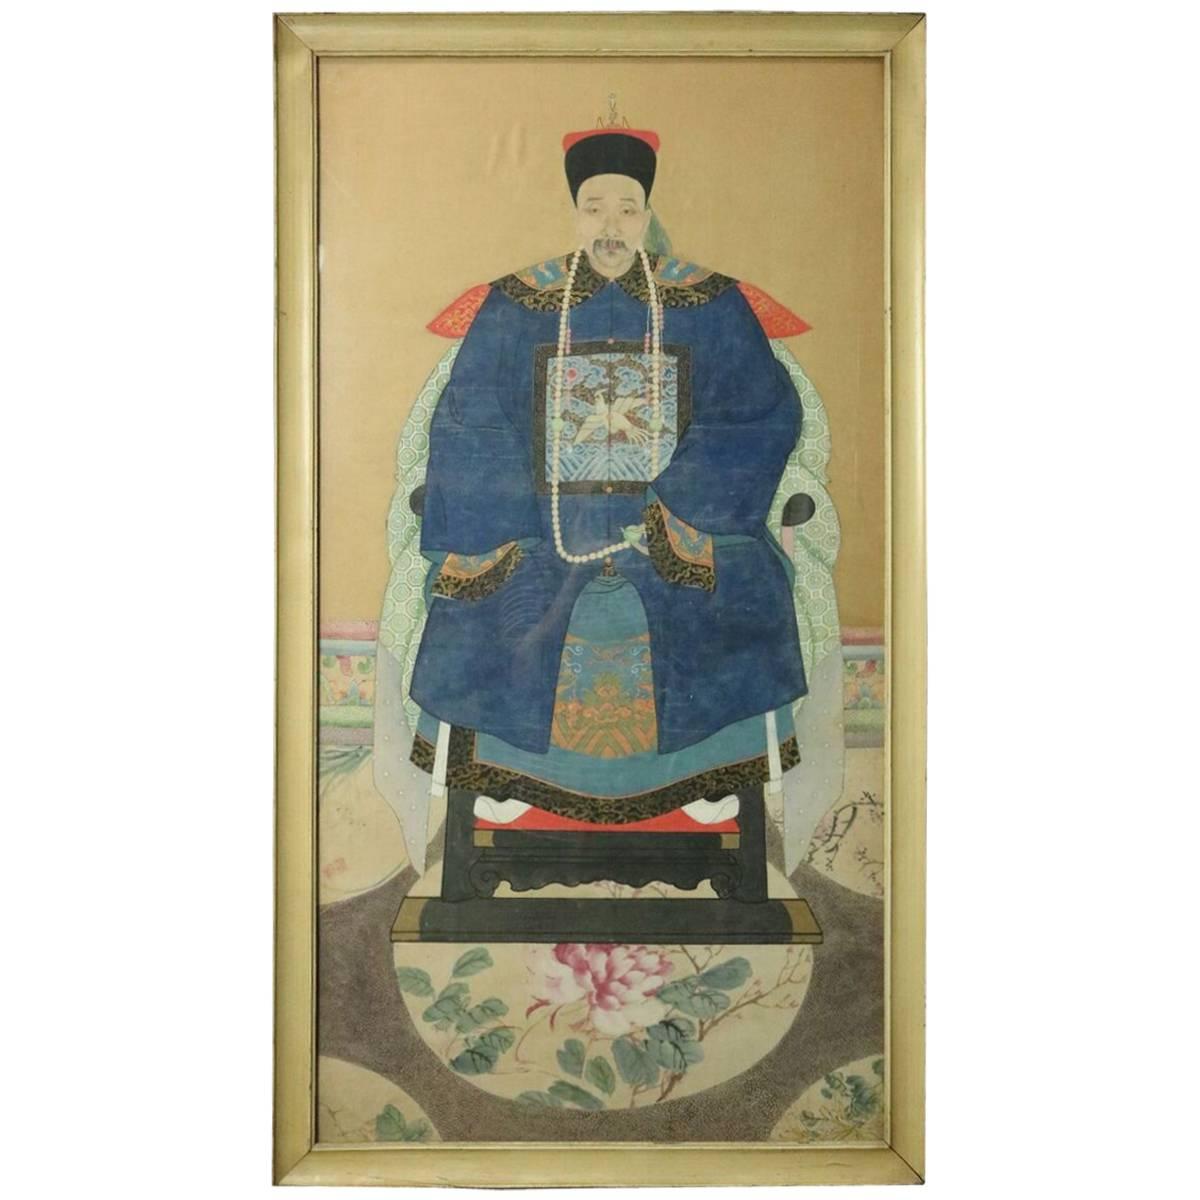 Antique Chinese Ancestral Painting, Large & Finely Painted in Color, circa 1890